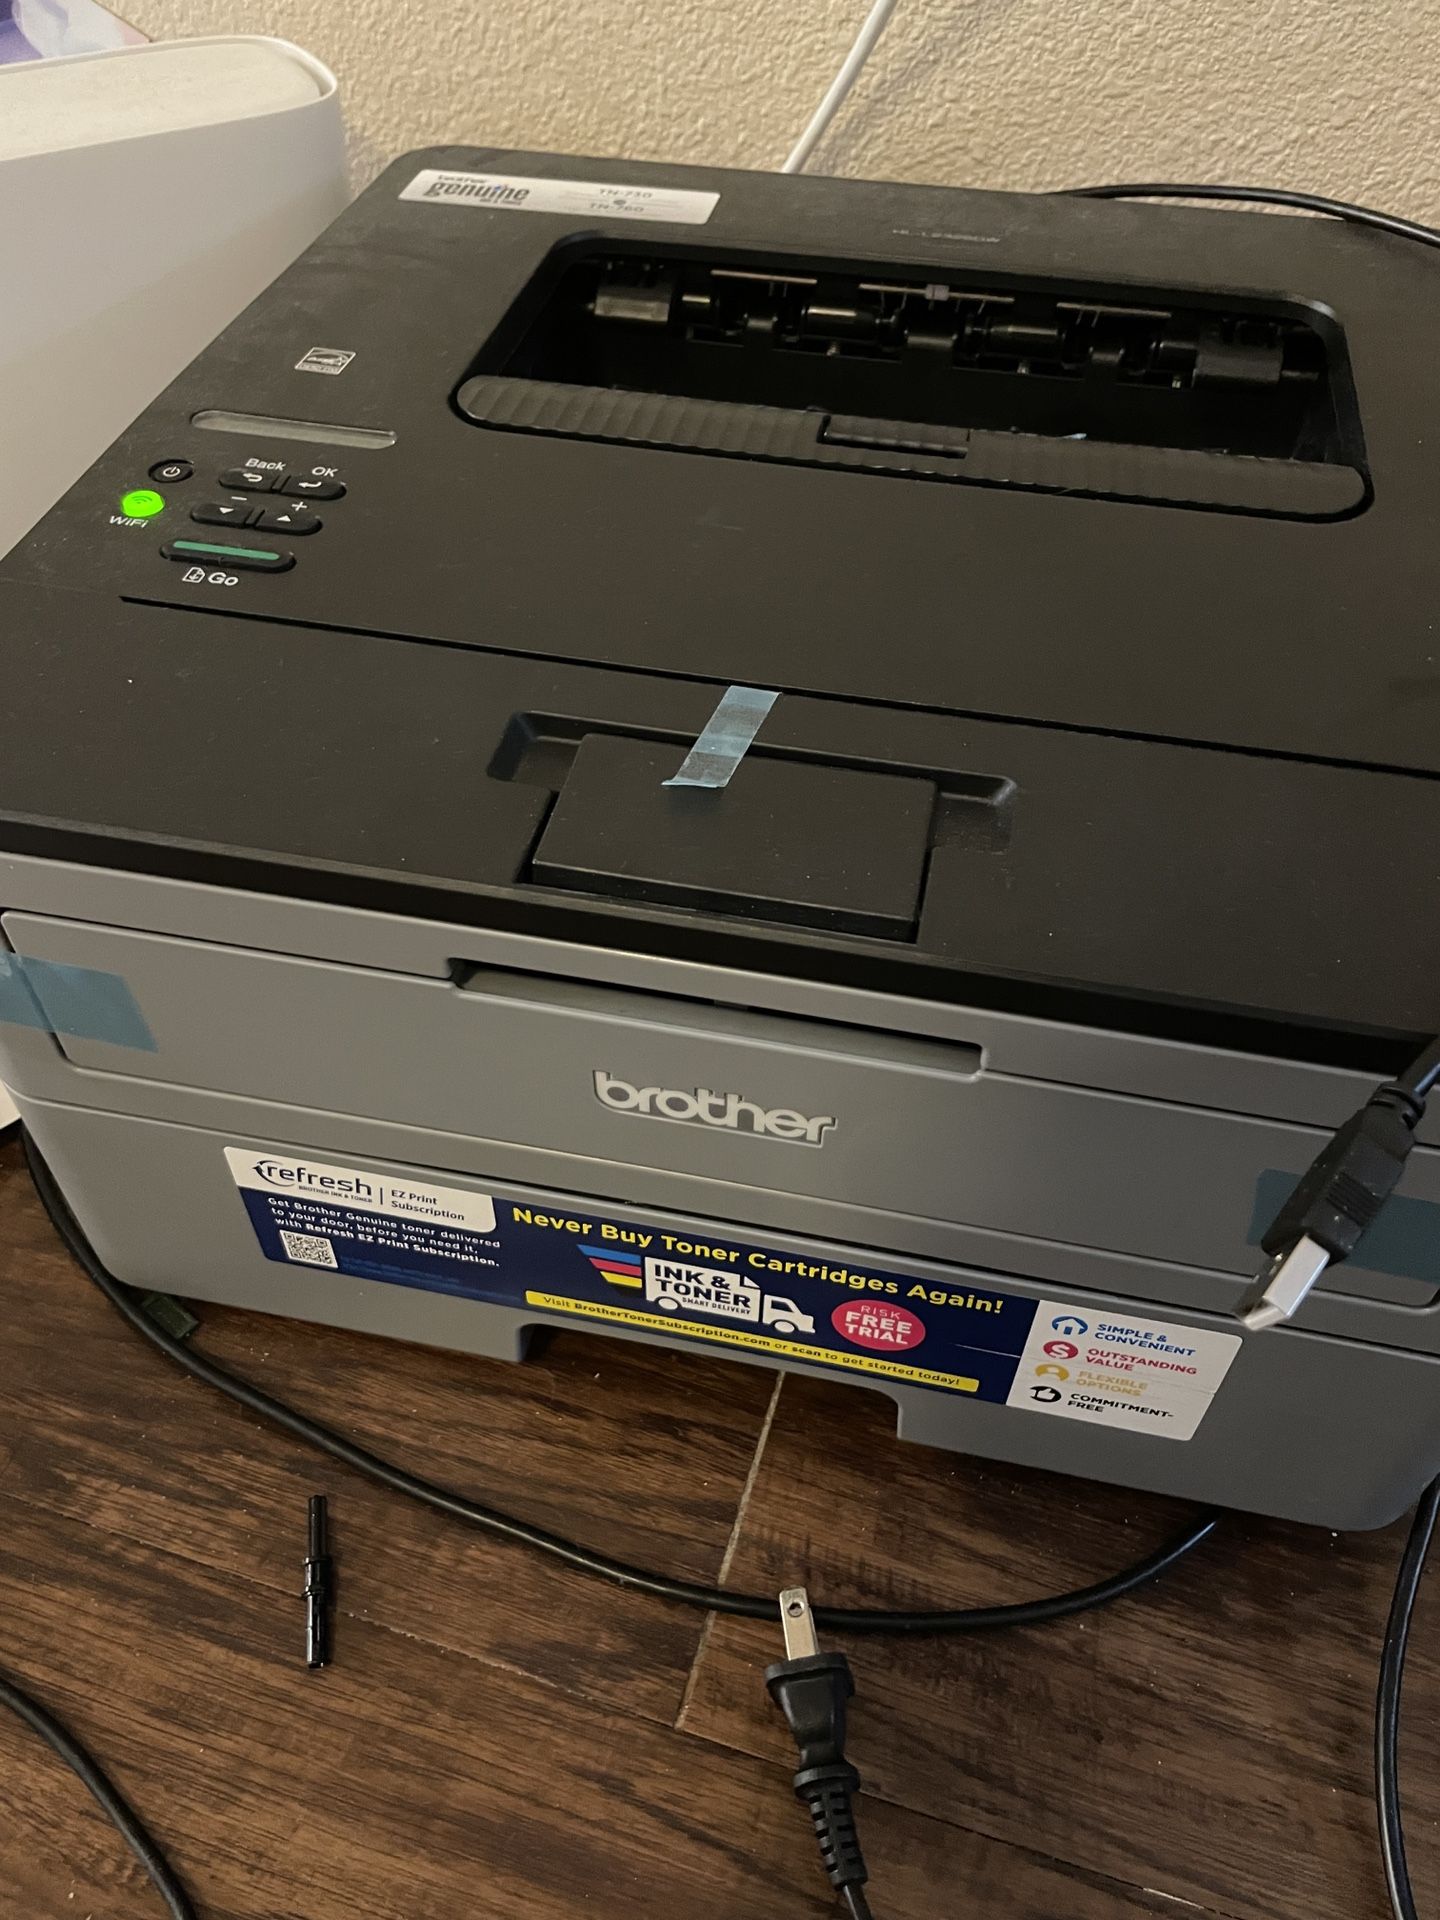 Almost New Brother Printer For $65